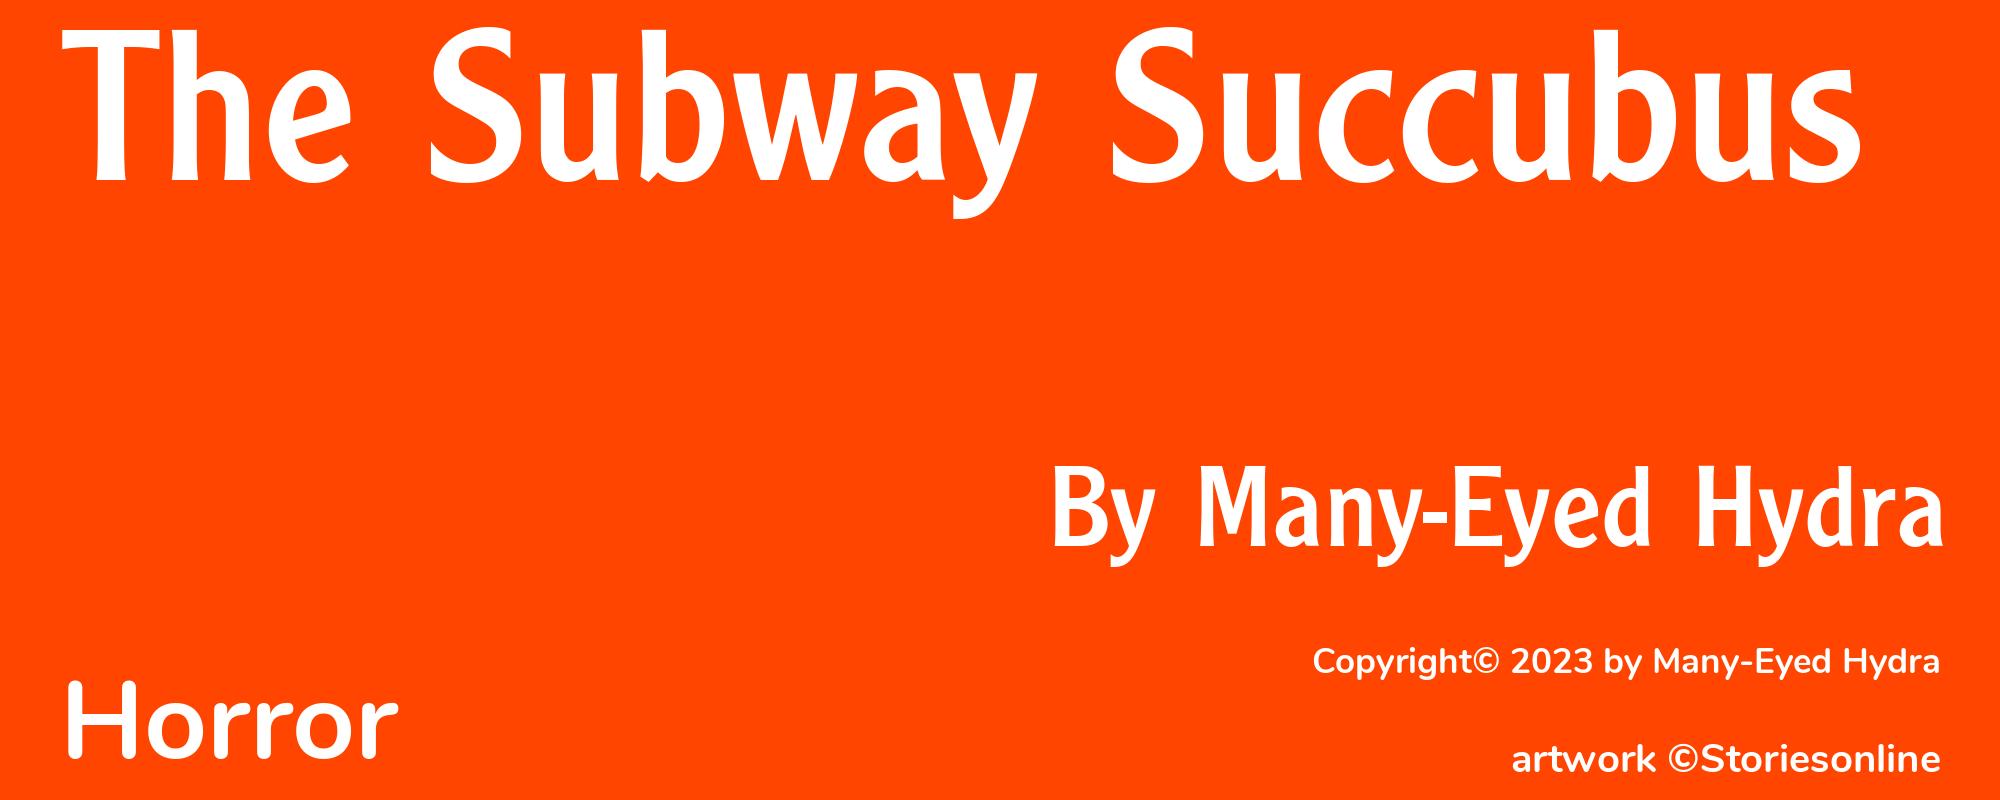 The Subway Succubus - Cover